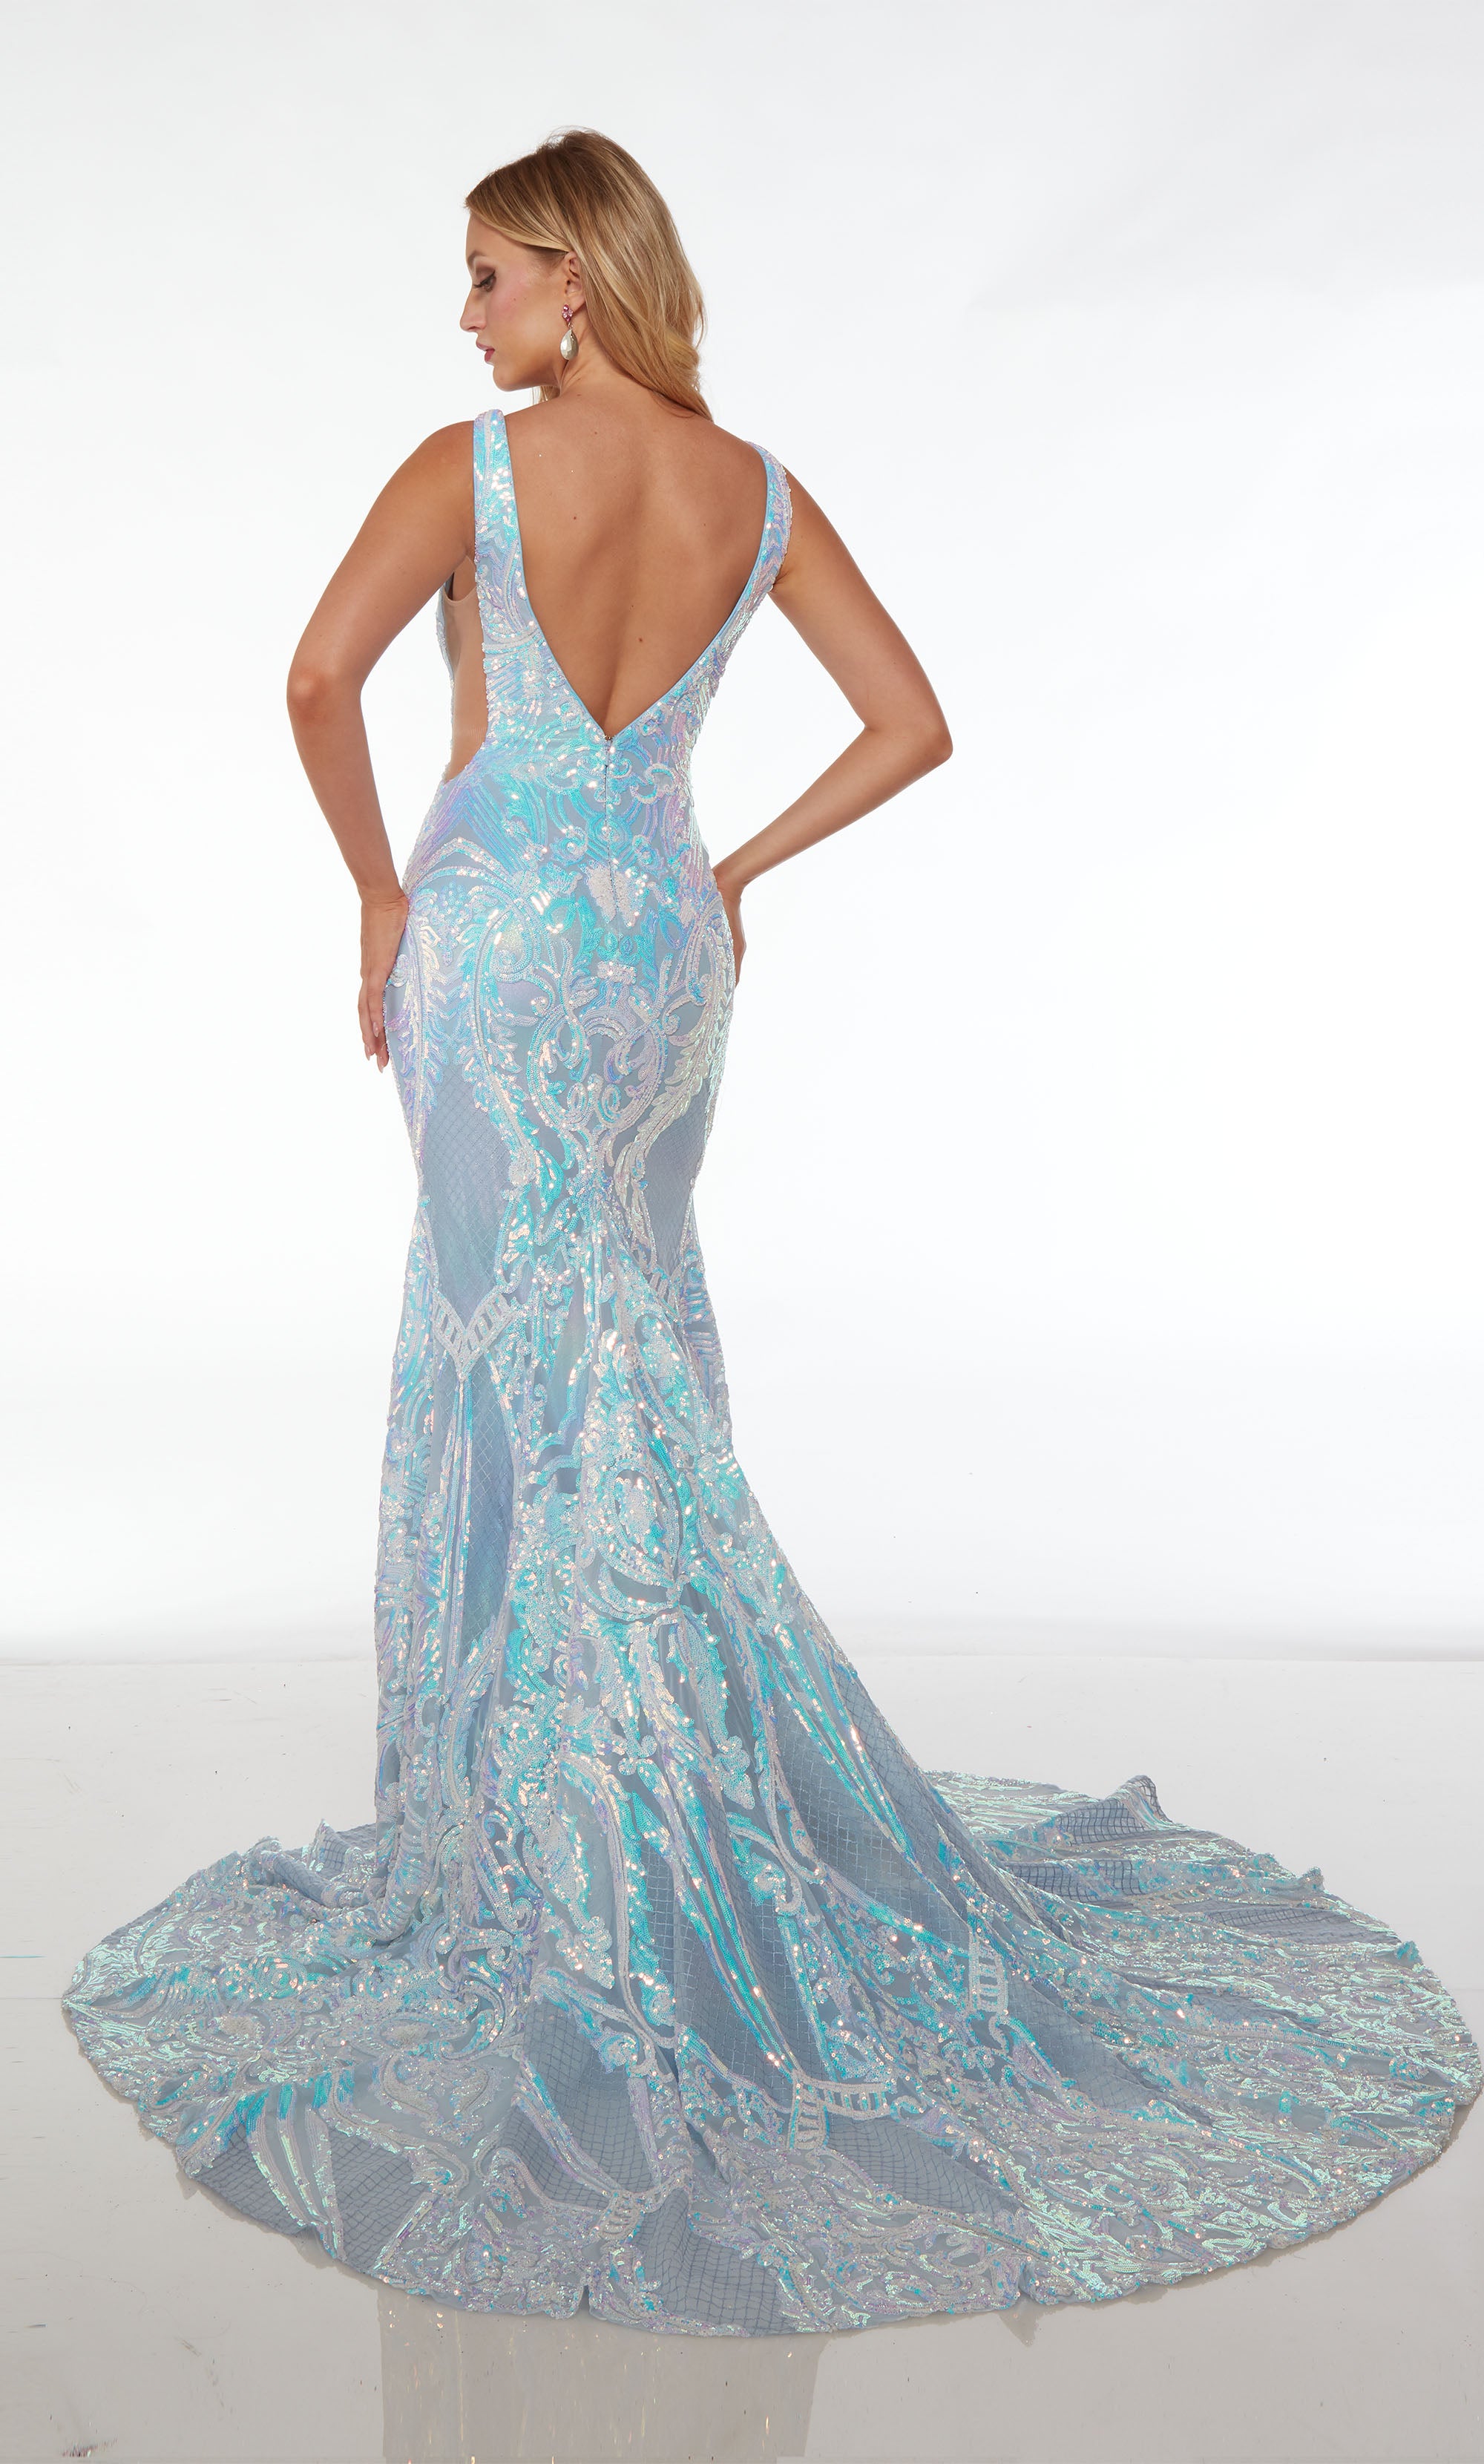 Opulent opal-blue formal dress: plunging neckline, illusion cutouts, paisley-patterned iridescent sequins, V-shaped back, and graceful train.